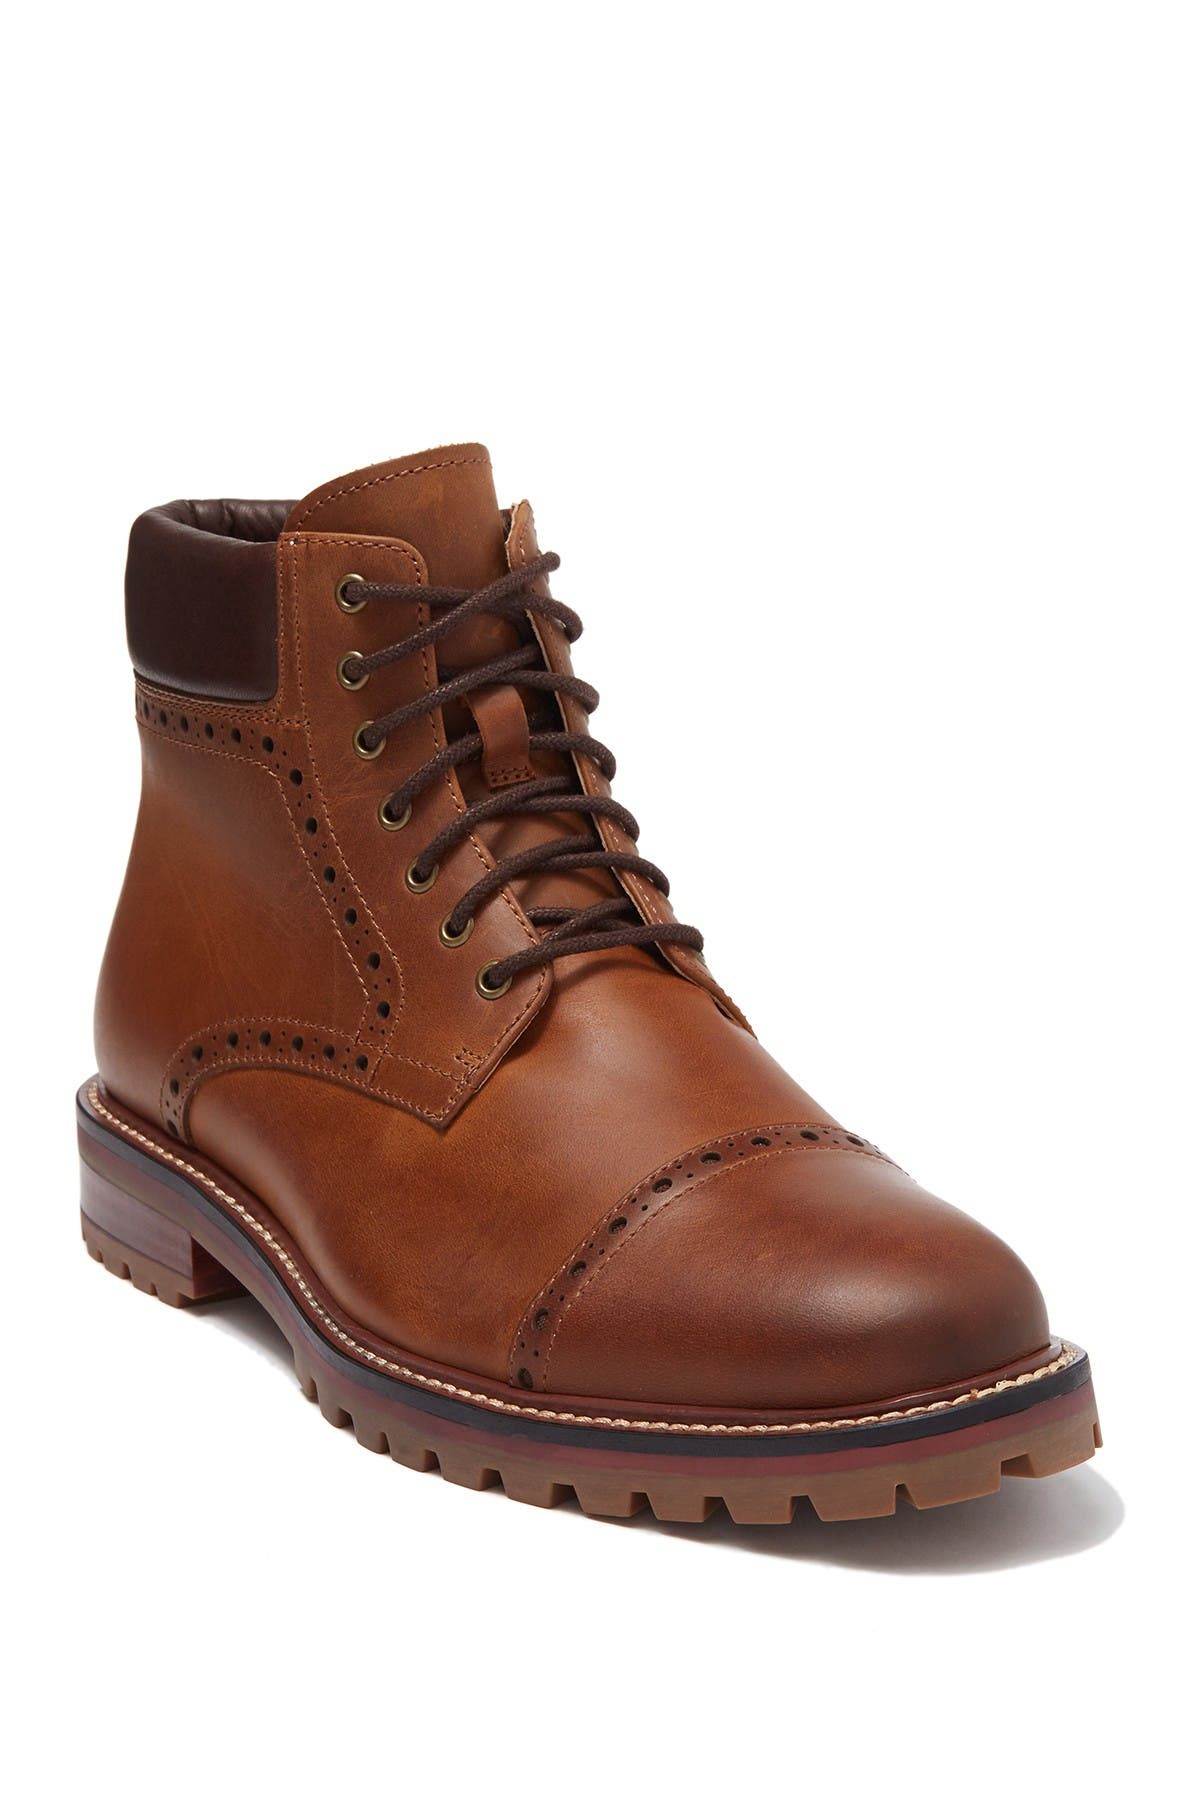 leather cap toe boots